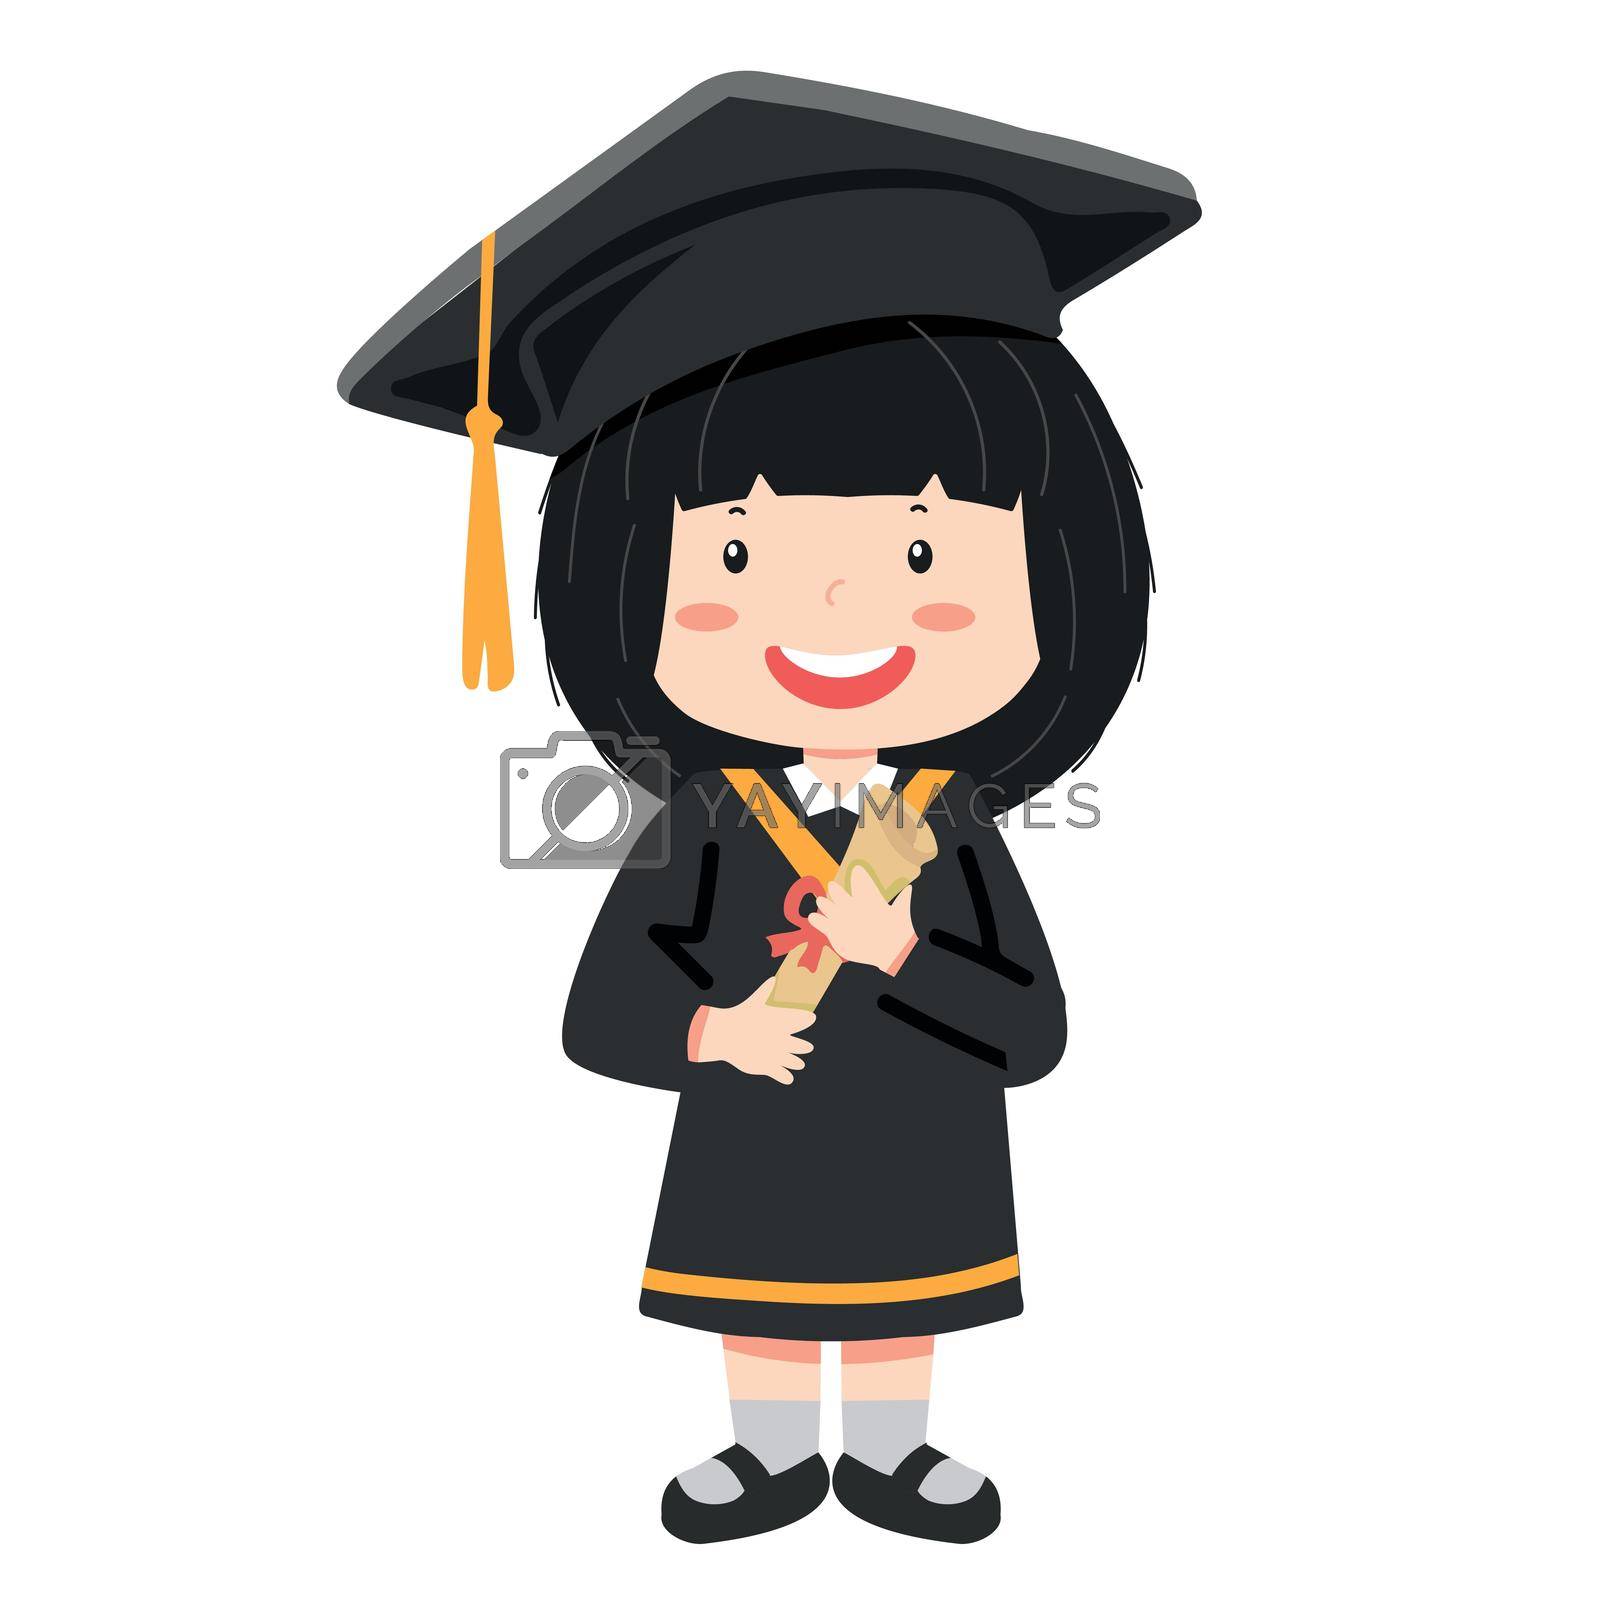 Royalty free image of Young boy graduate student in graduation cap by focus_bell